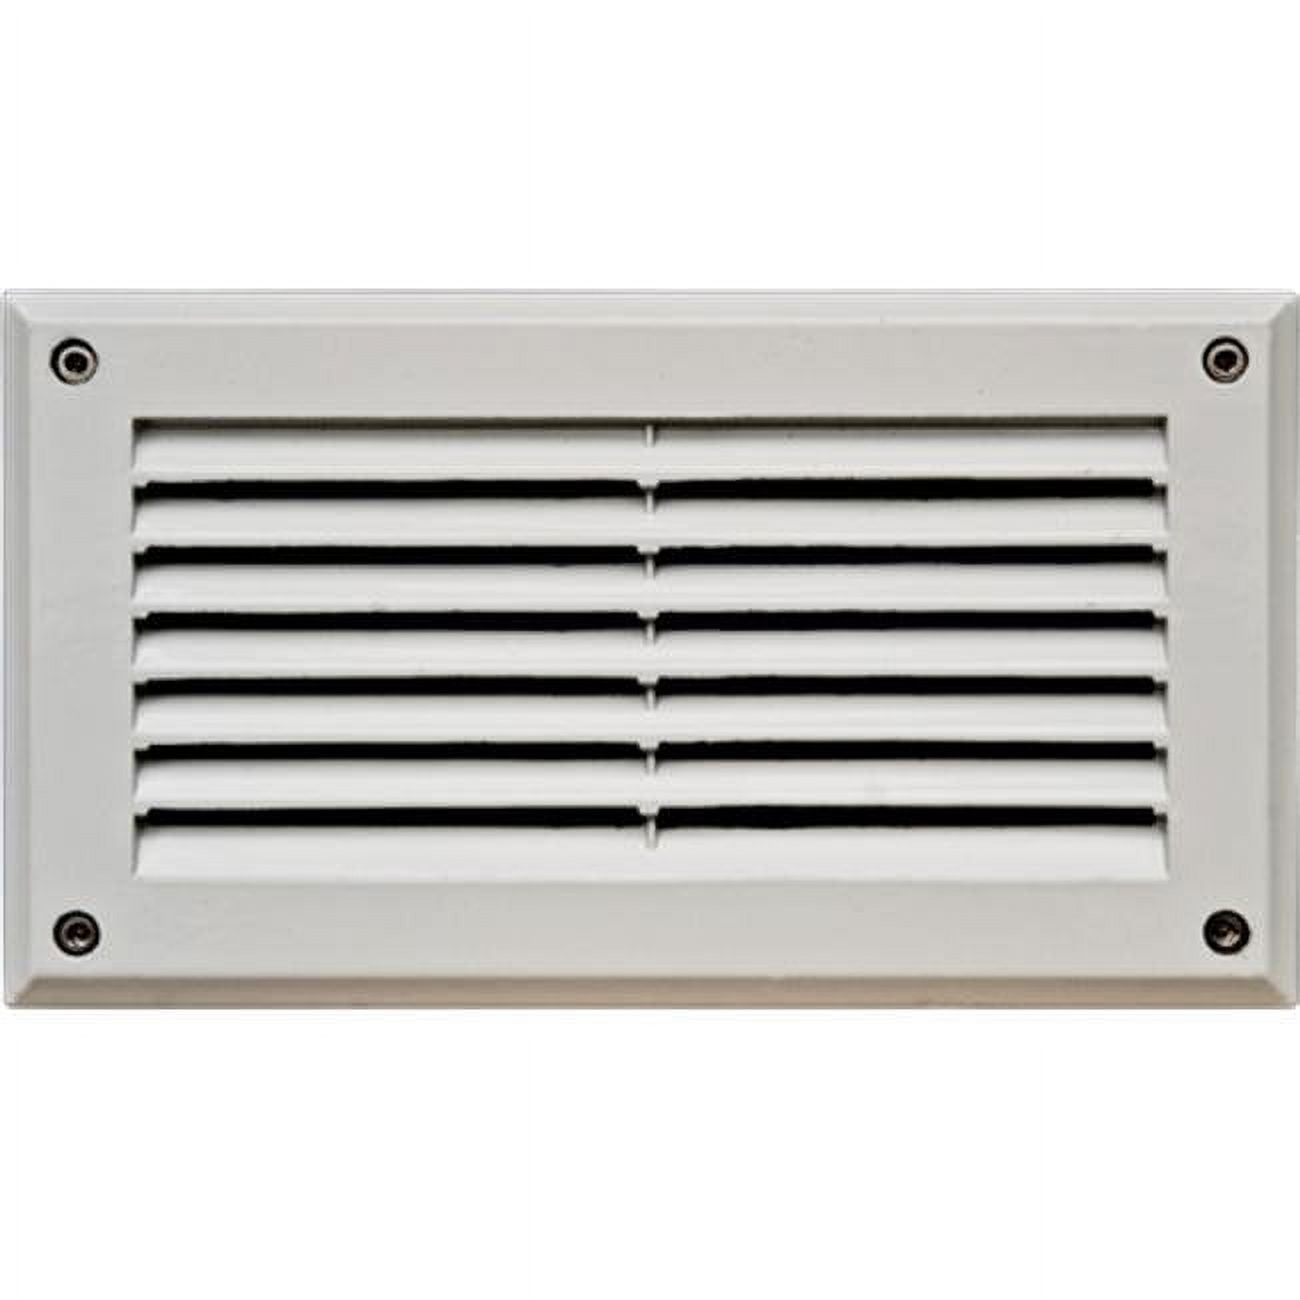 Picture of Dabmar Lighting DSL1000-W Recessed Louvered Brick, Step & Wall Light, White - 5 x 8.80 x 3.10 in.